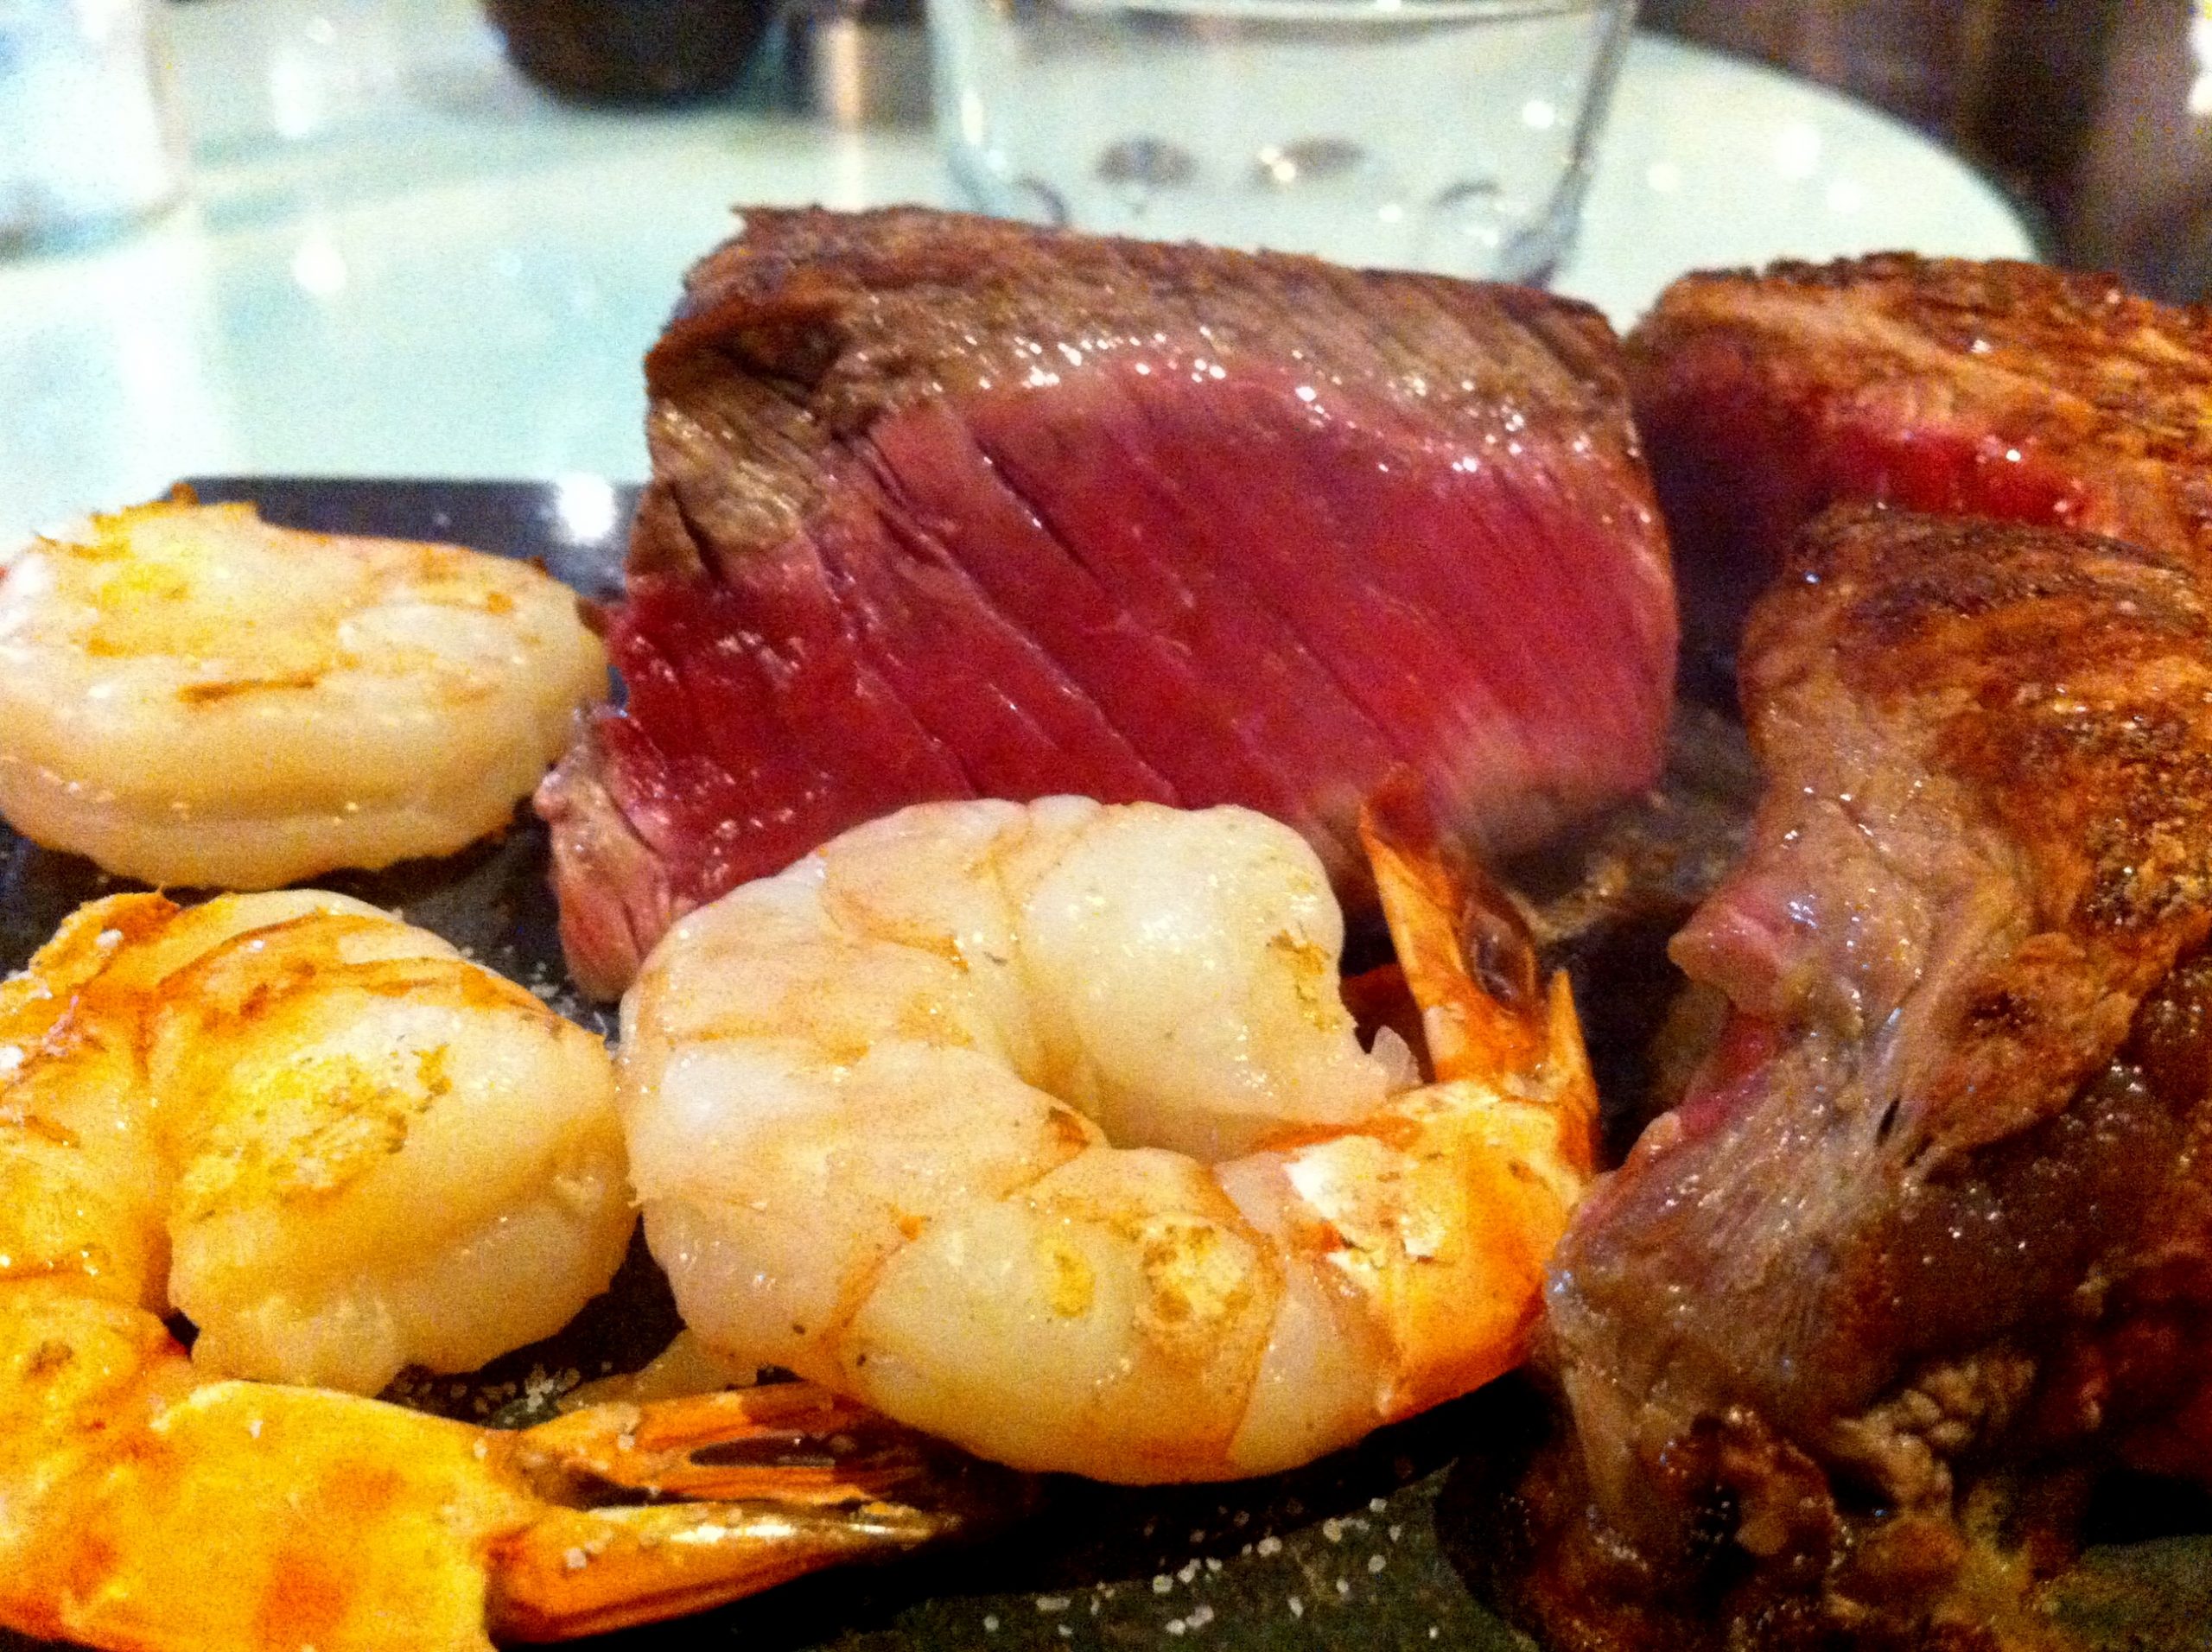 Steak and Shrimp Surf and Turf